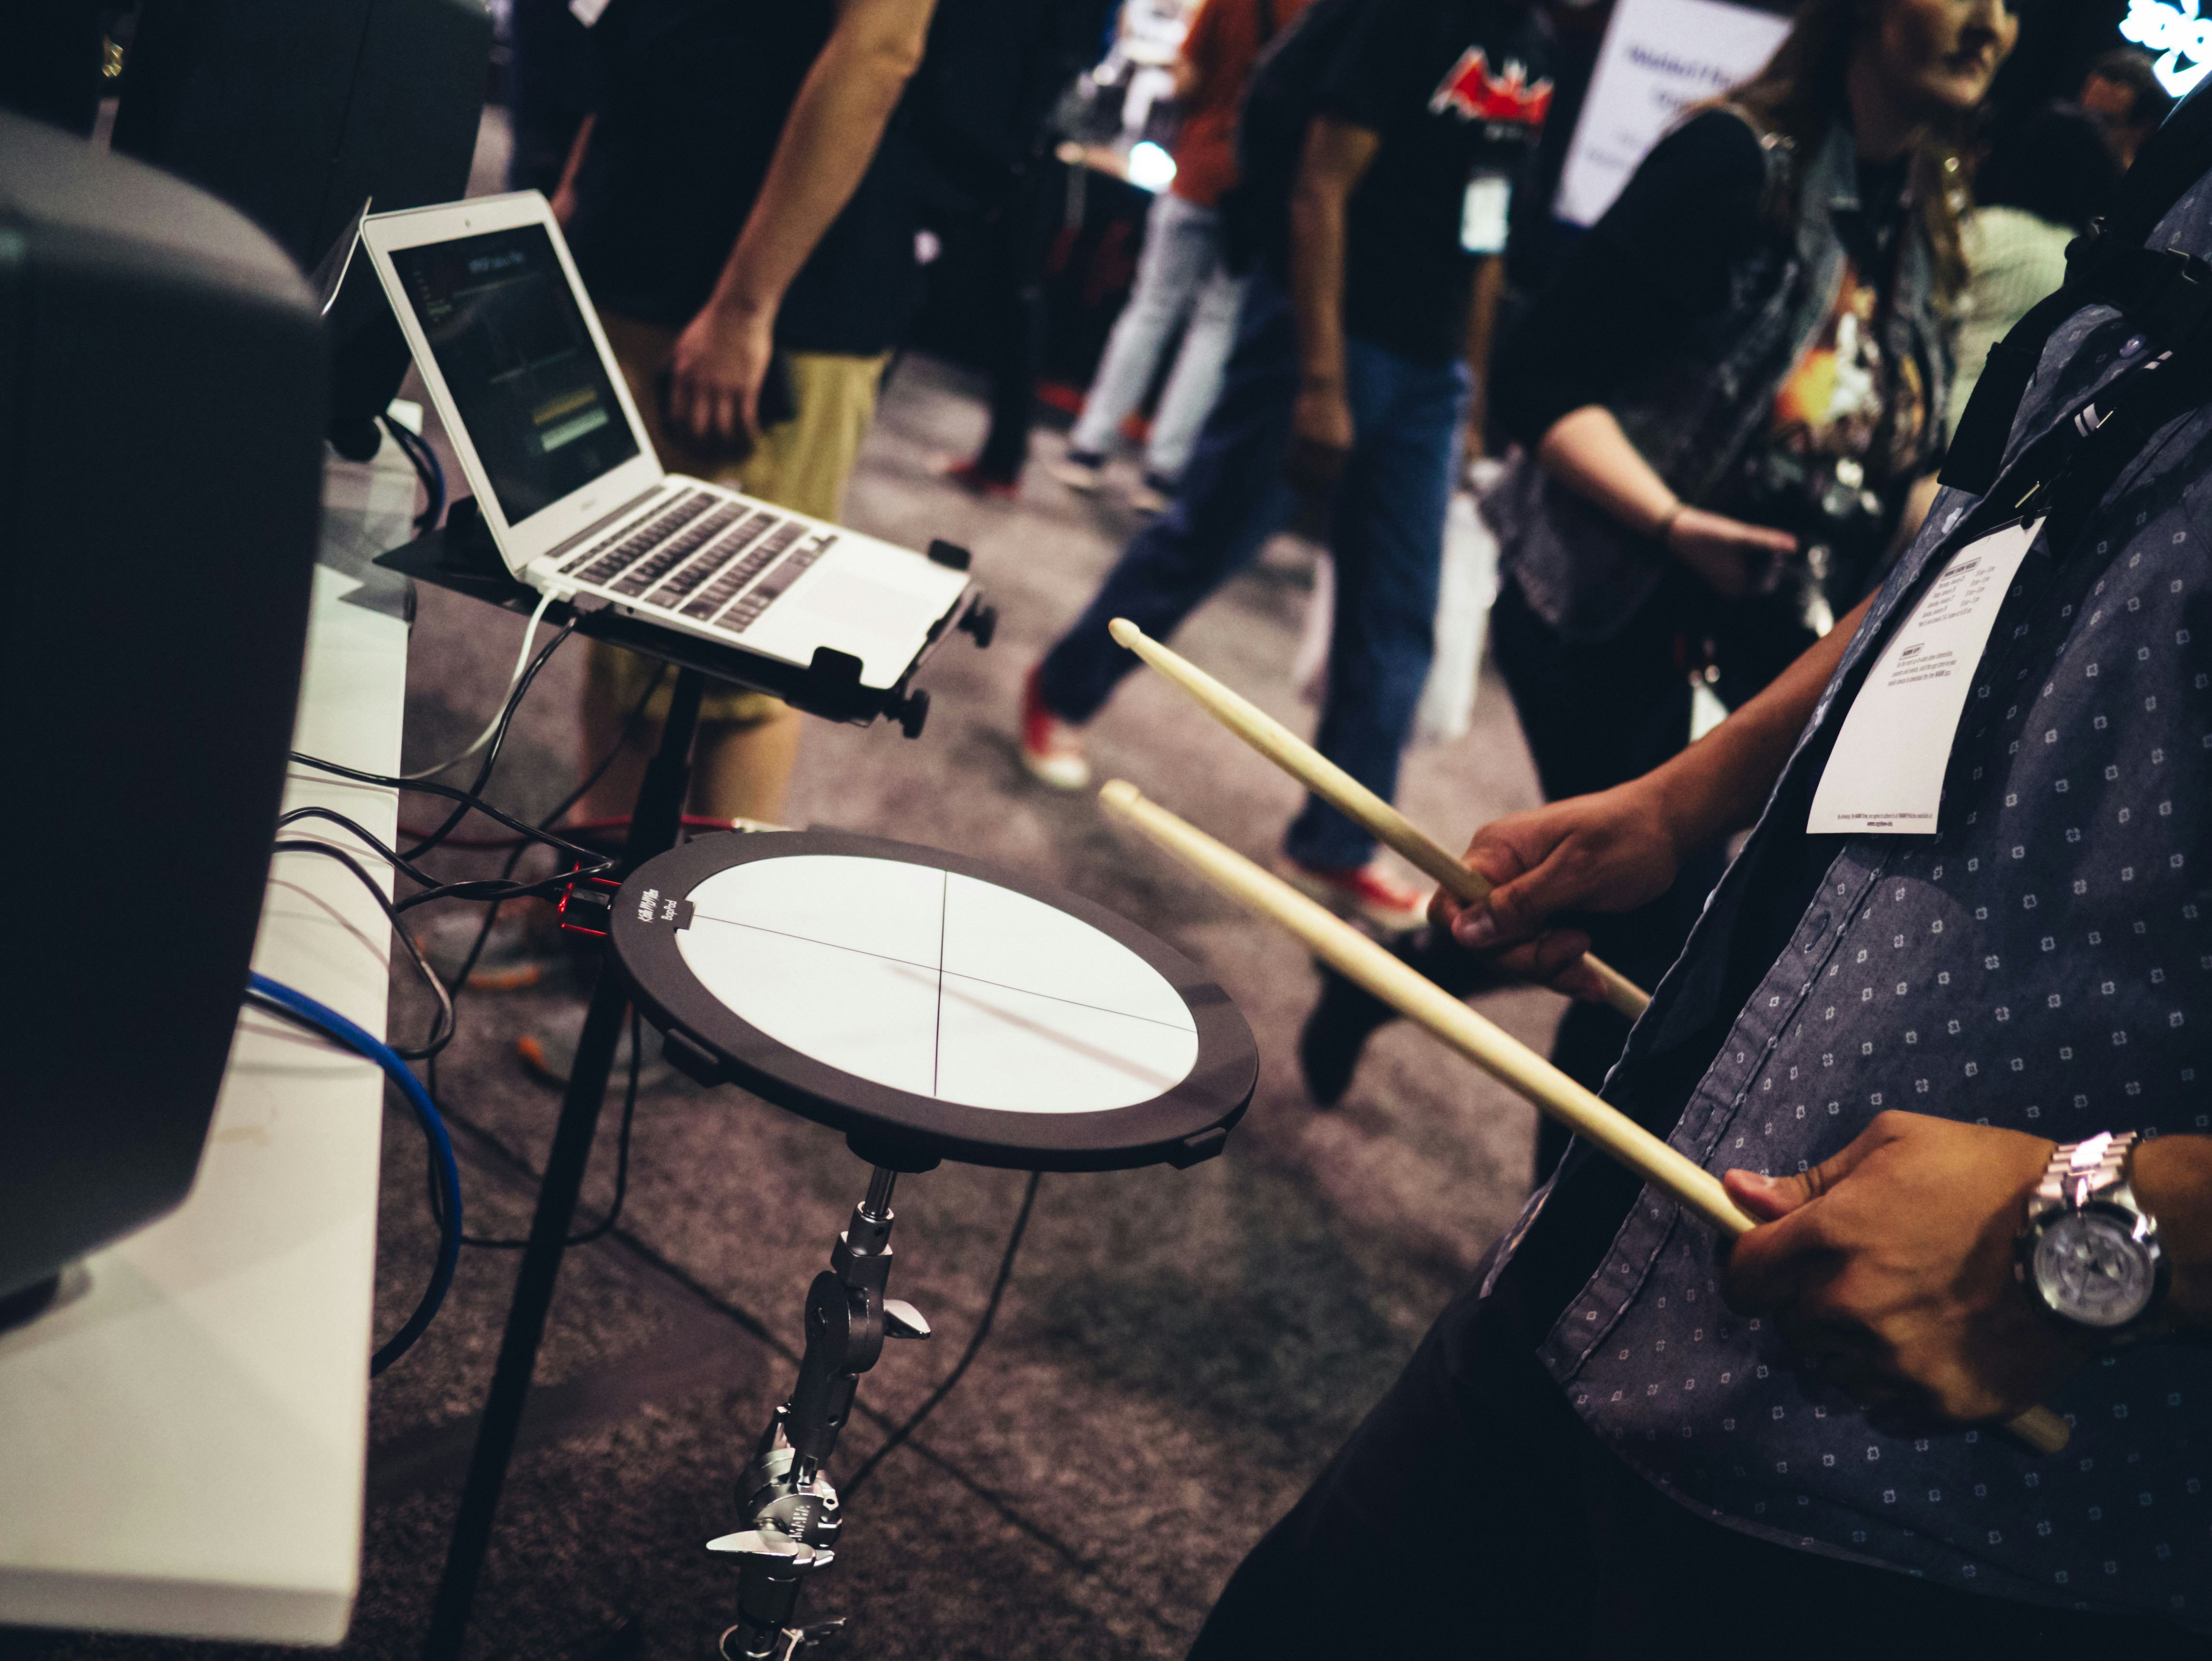 Keith McMillen makes the dopest midi controllers! I had to stop by their booth at NAMM 2018. I tried this midi drum controller, and it’s really cool.